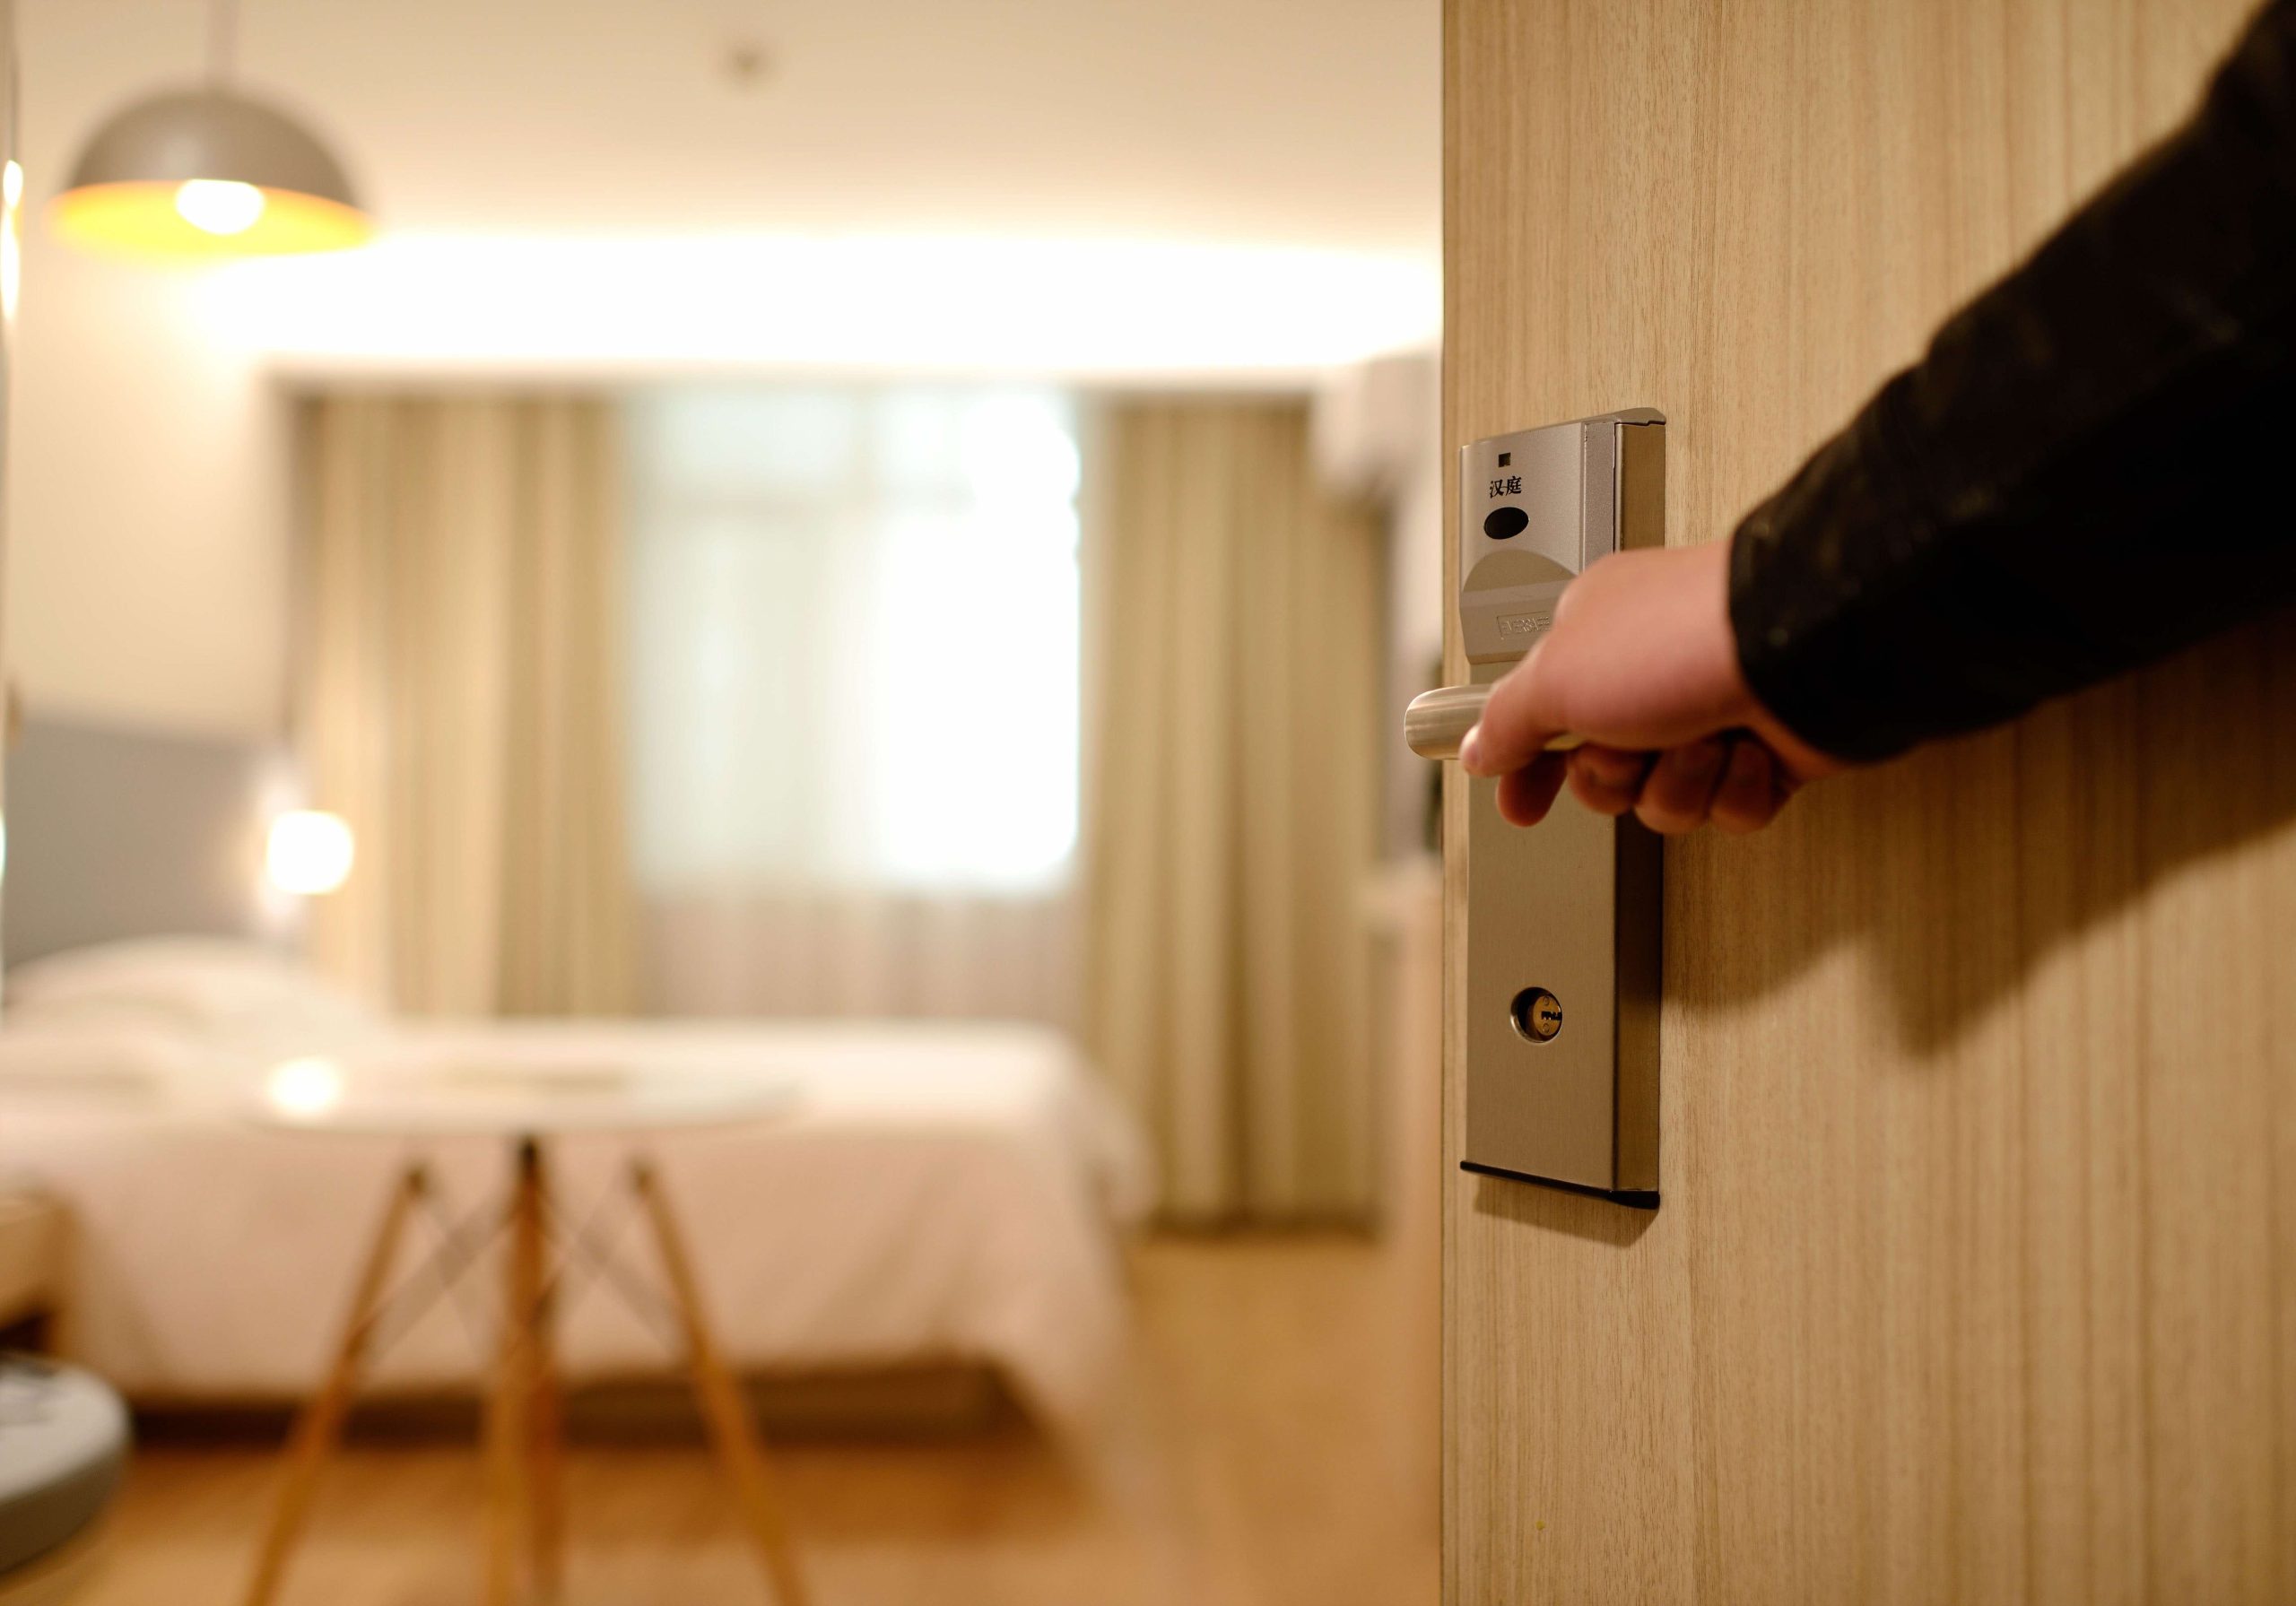 These Hotel Hacks Will Give You the Ultimate Experience